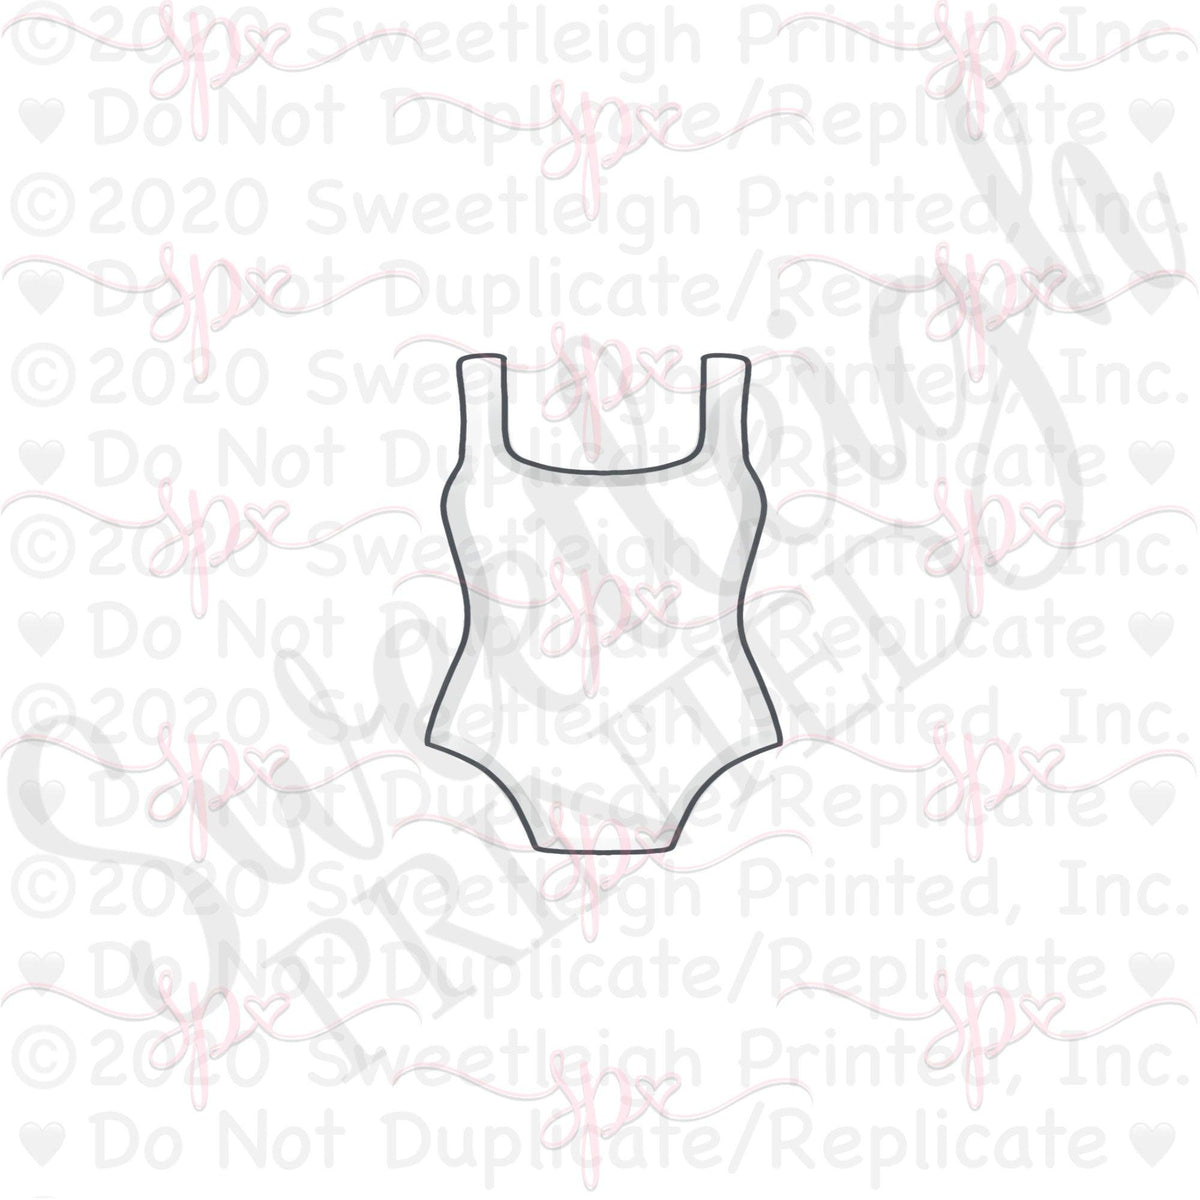 Full Basic Bathing Suit 2 Cookie Cutter - Sweetleigh 